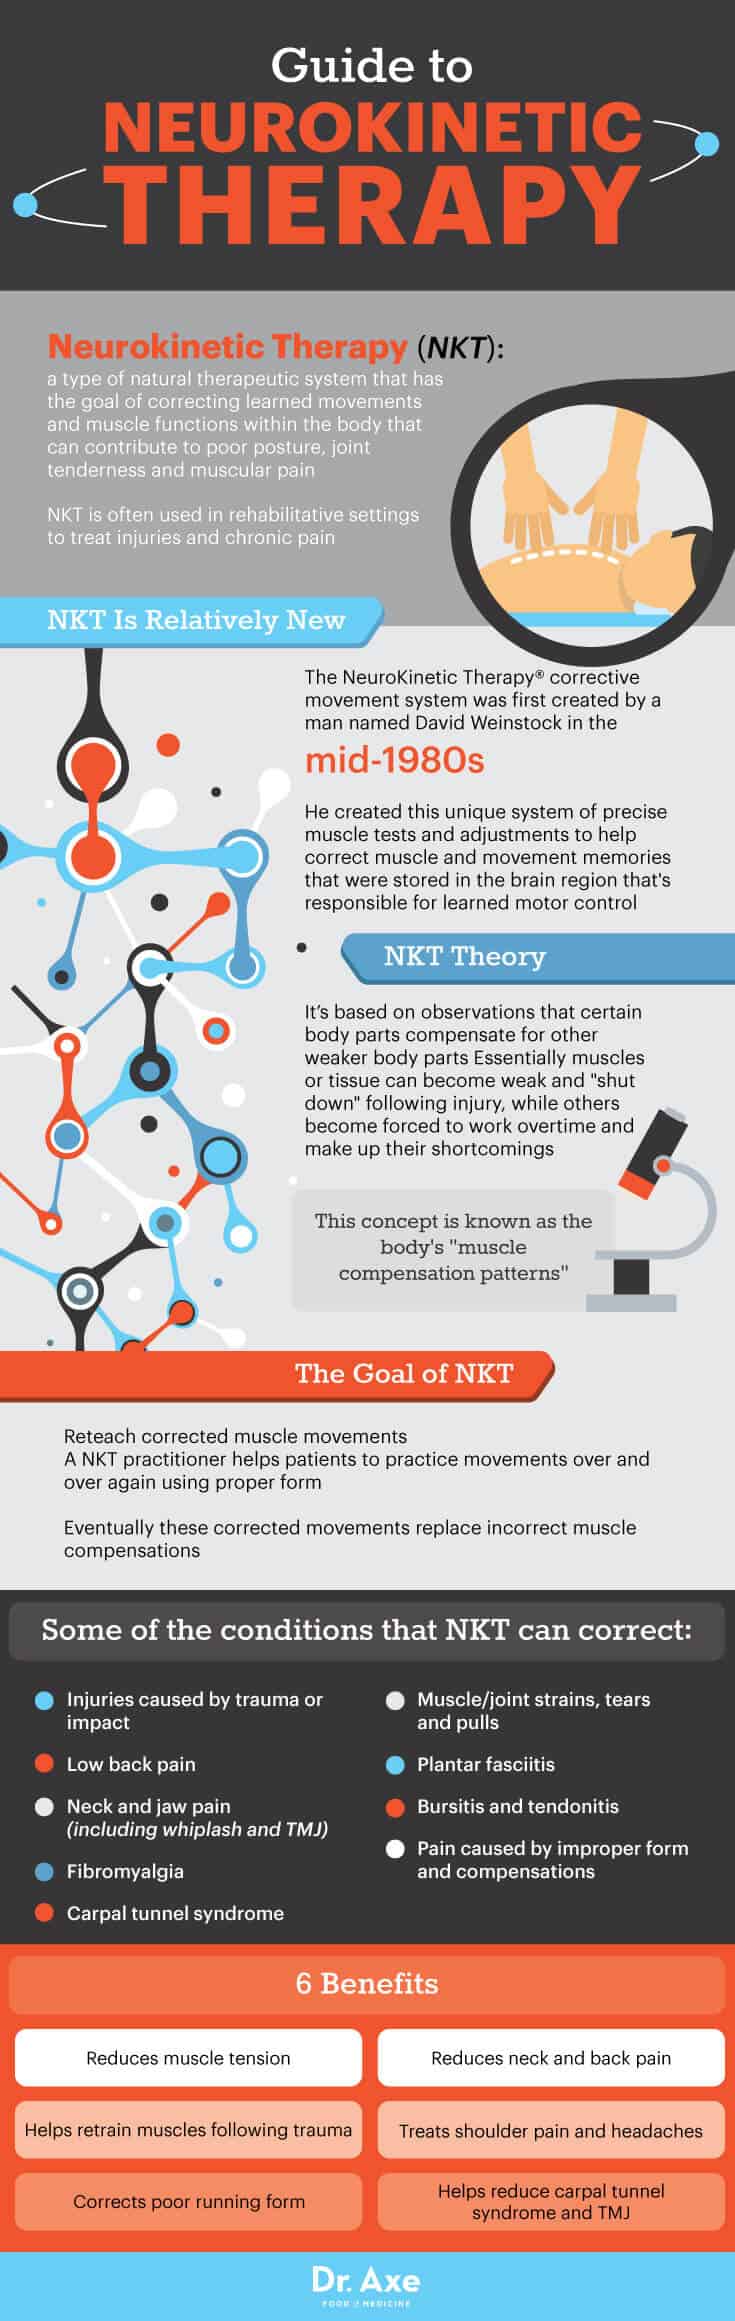 Guide to neurokinetic therapy - Dr. Axe